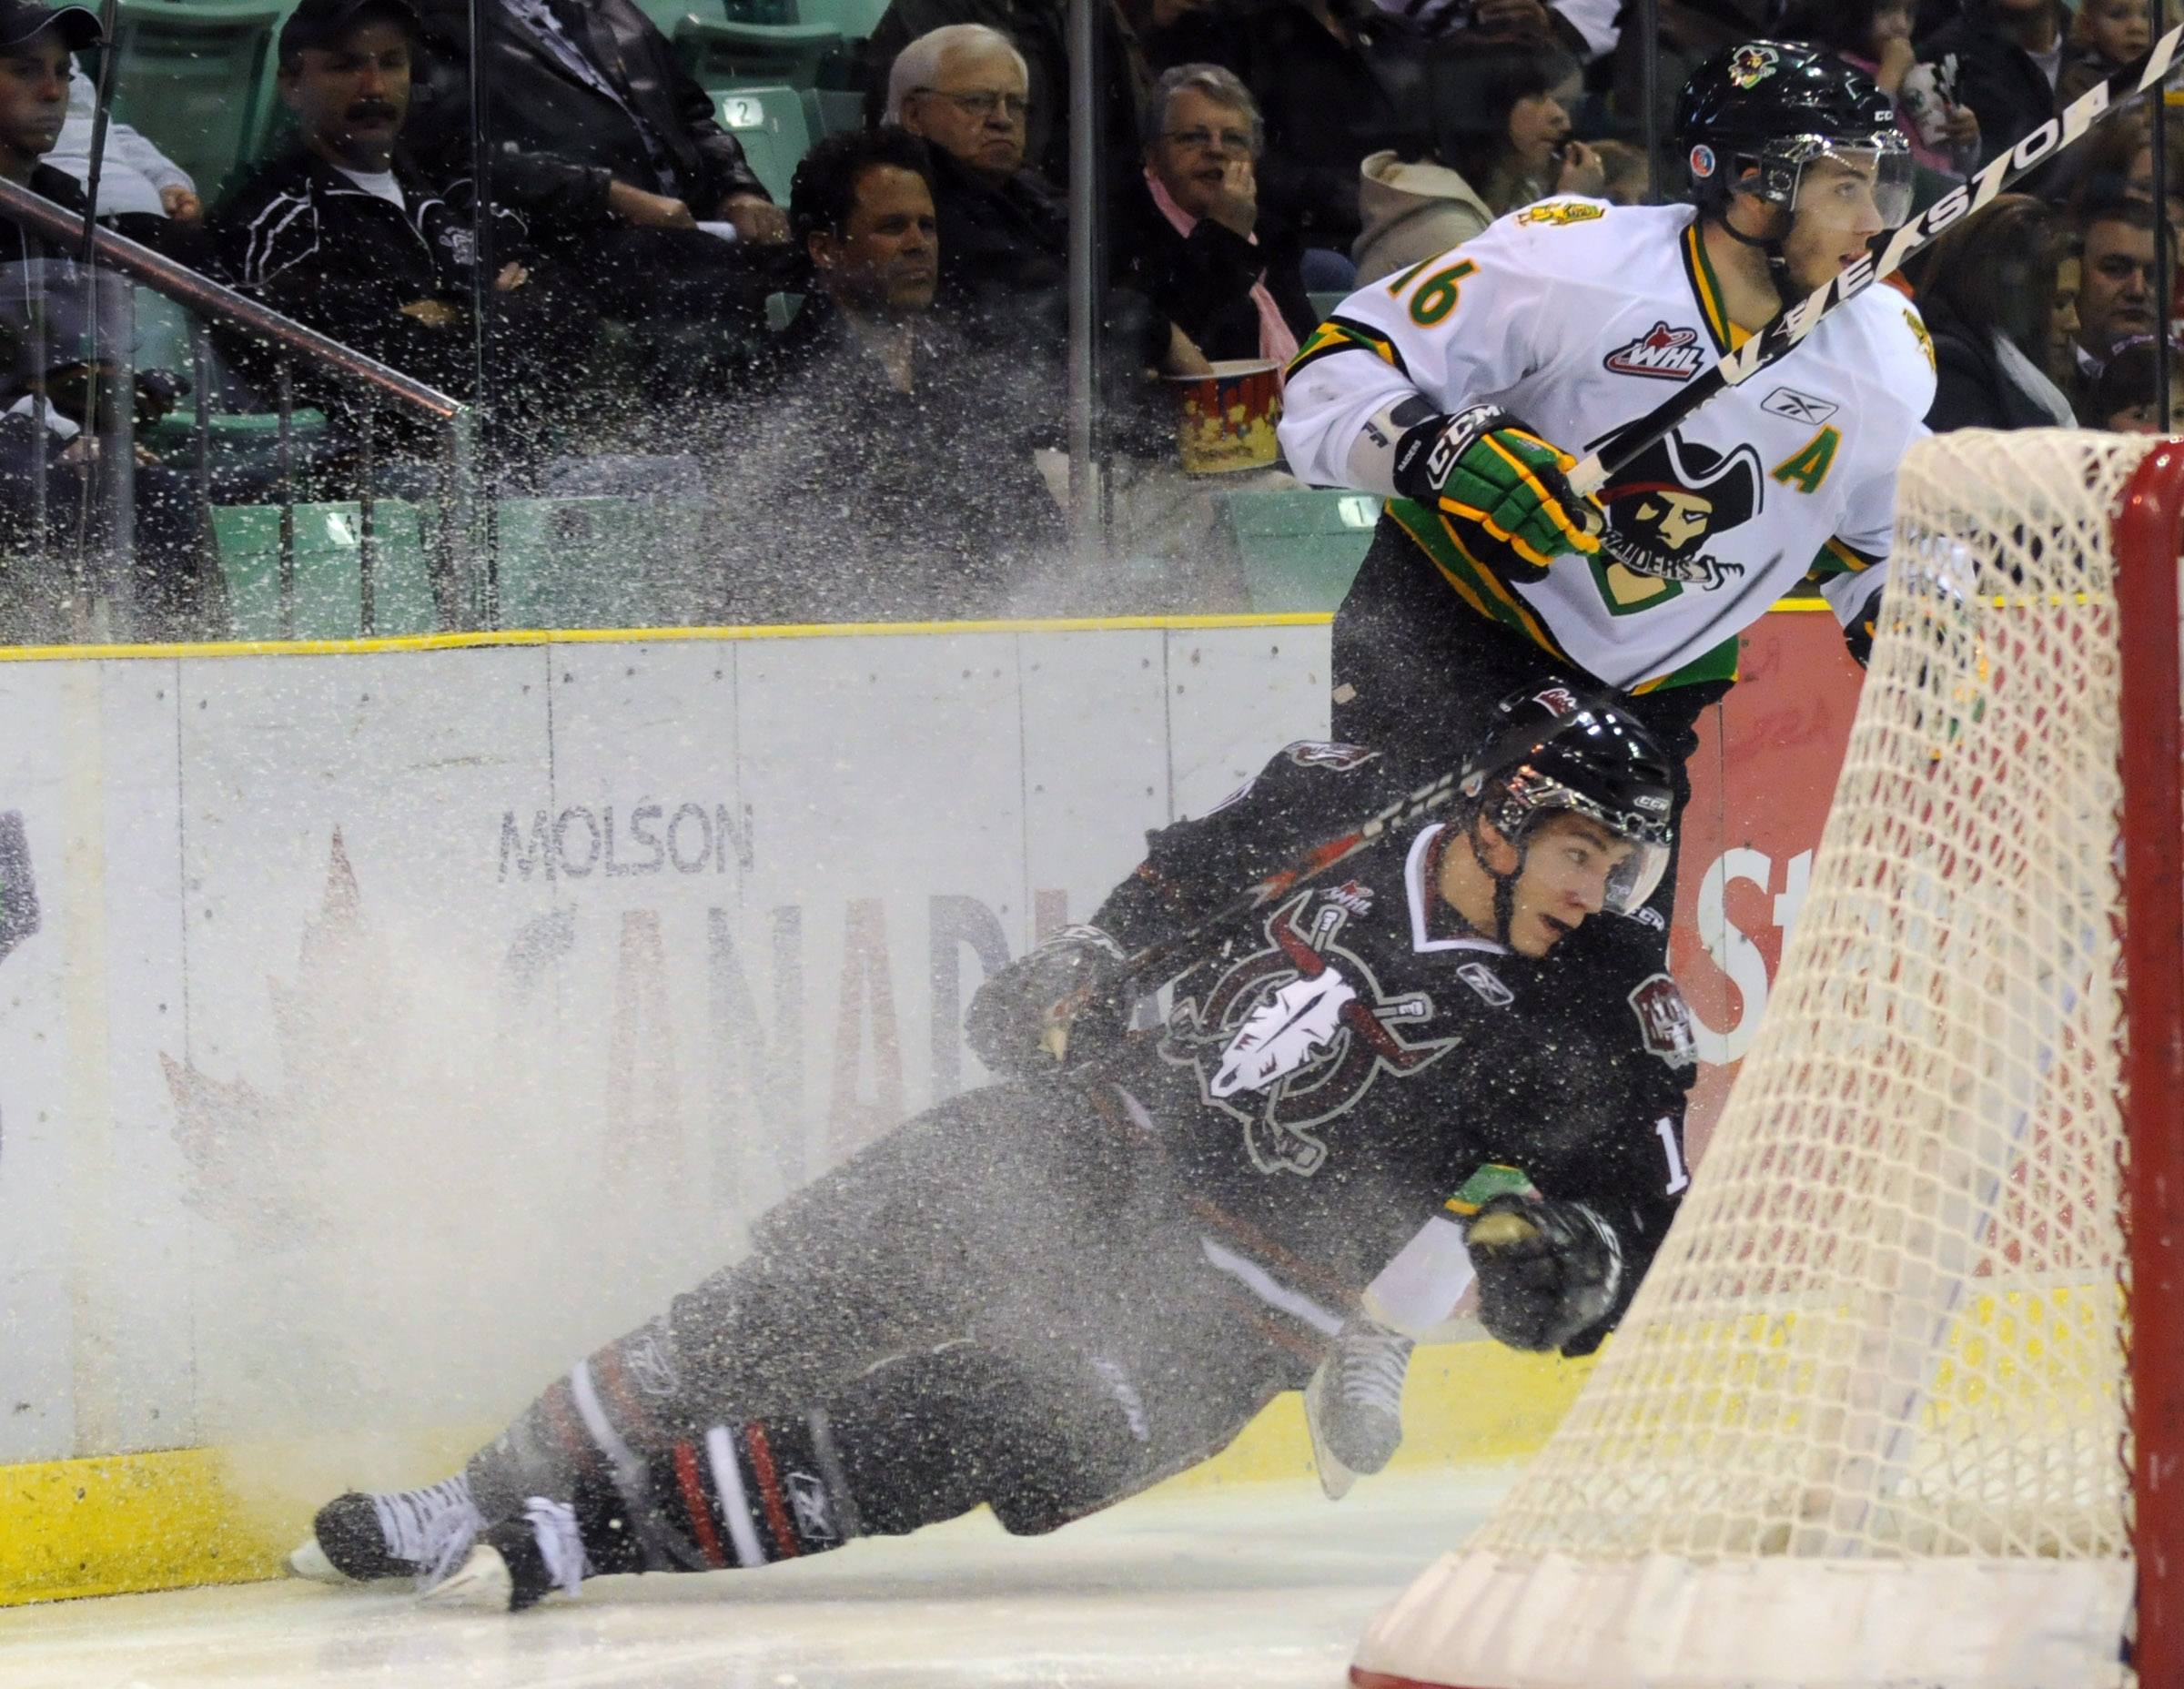 QUICK ADJUSTMENT-Red Deer Rebels Turner Elson makes a quick turn while chasing after the puck during WHL action Saturday night against Prince Albert. The Rebels won 6-2.